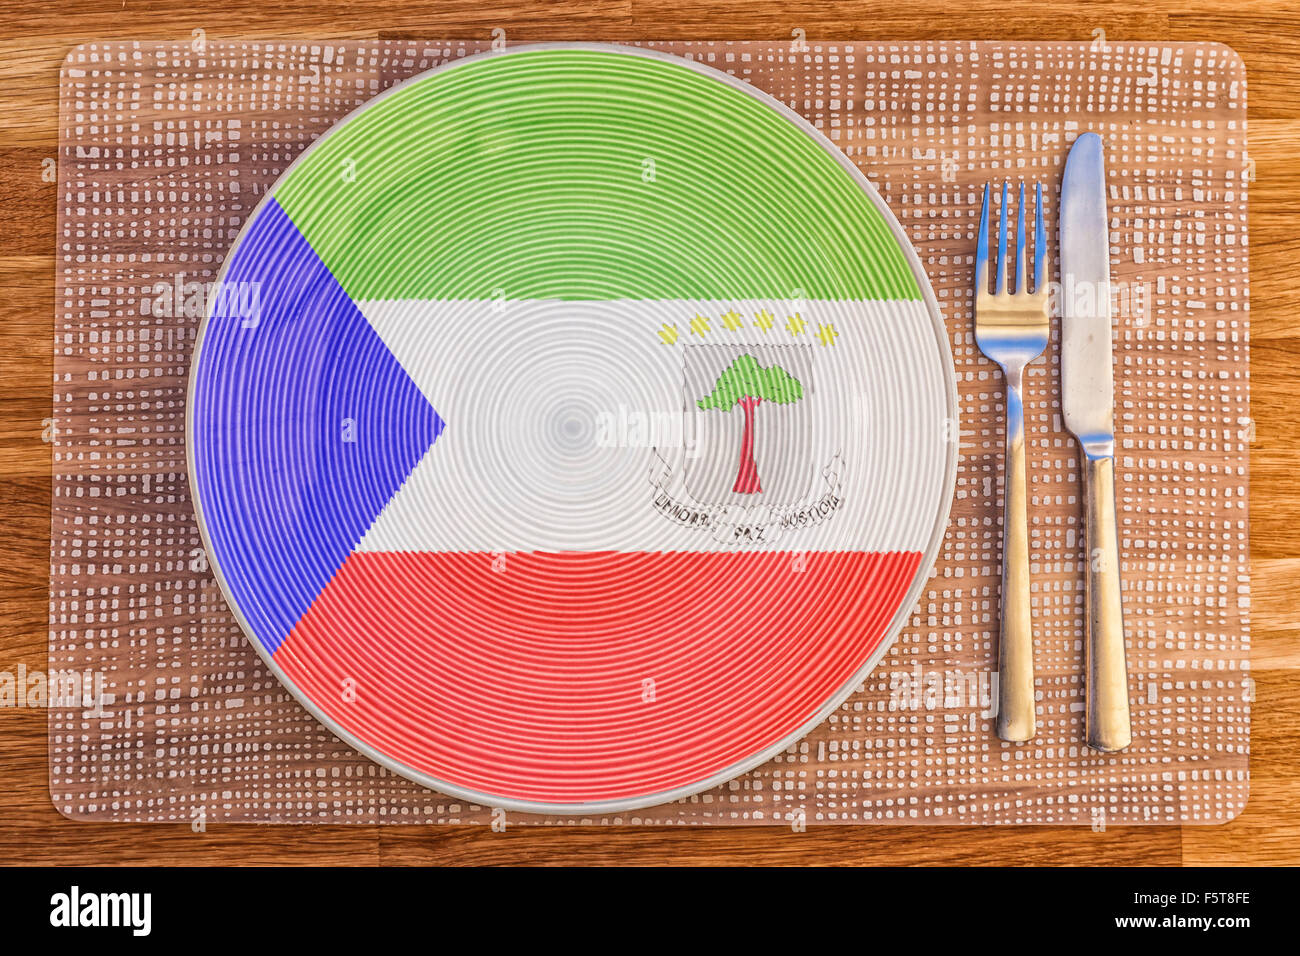 Dinner plate with the flag of Equatorial Guinea on it for your international food and drink concepts. Stock Photo